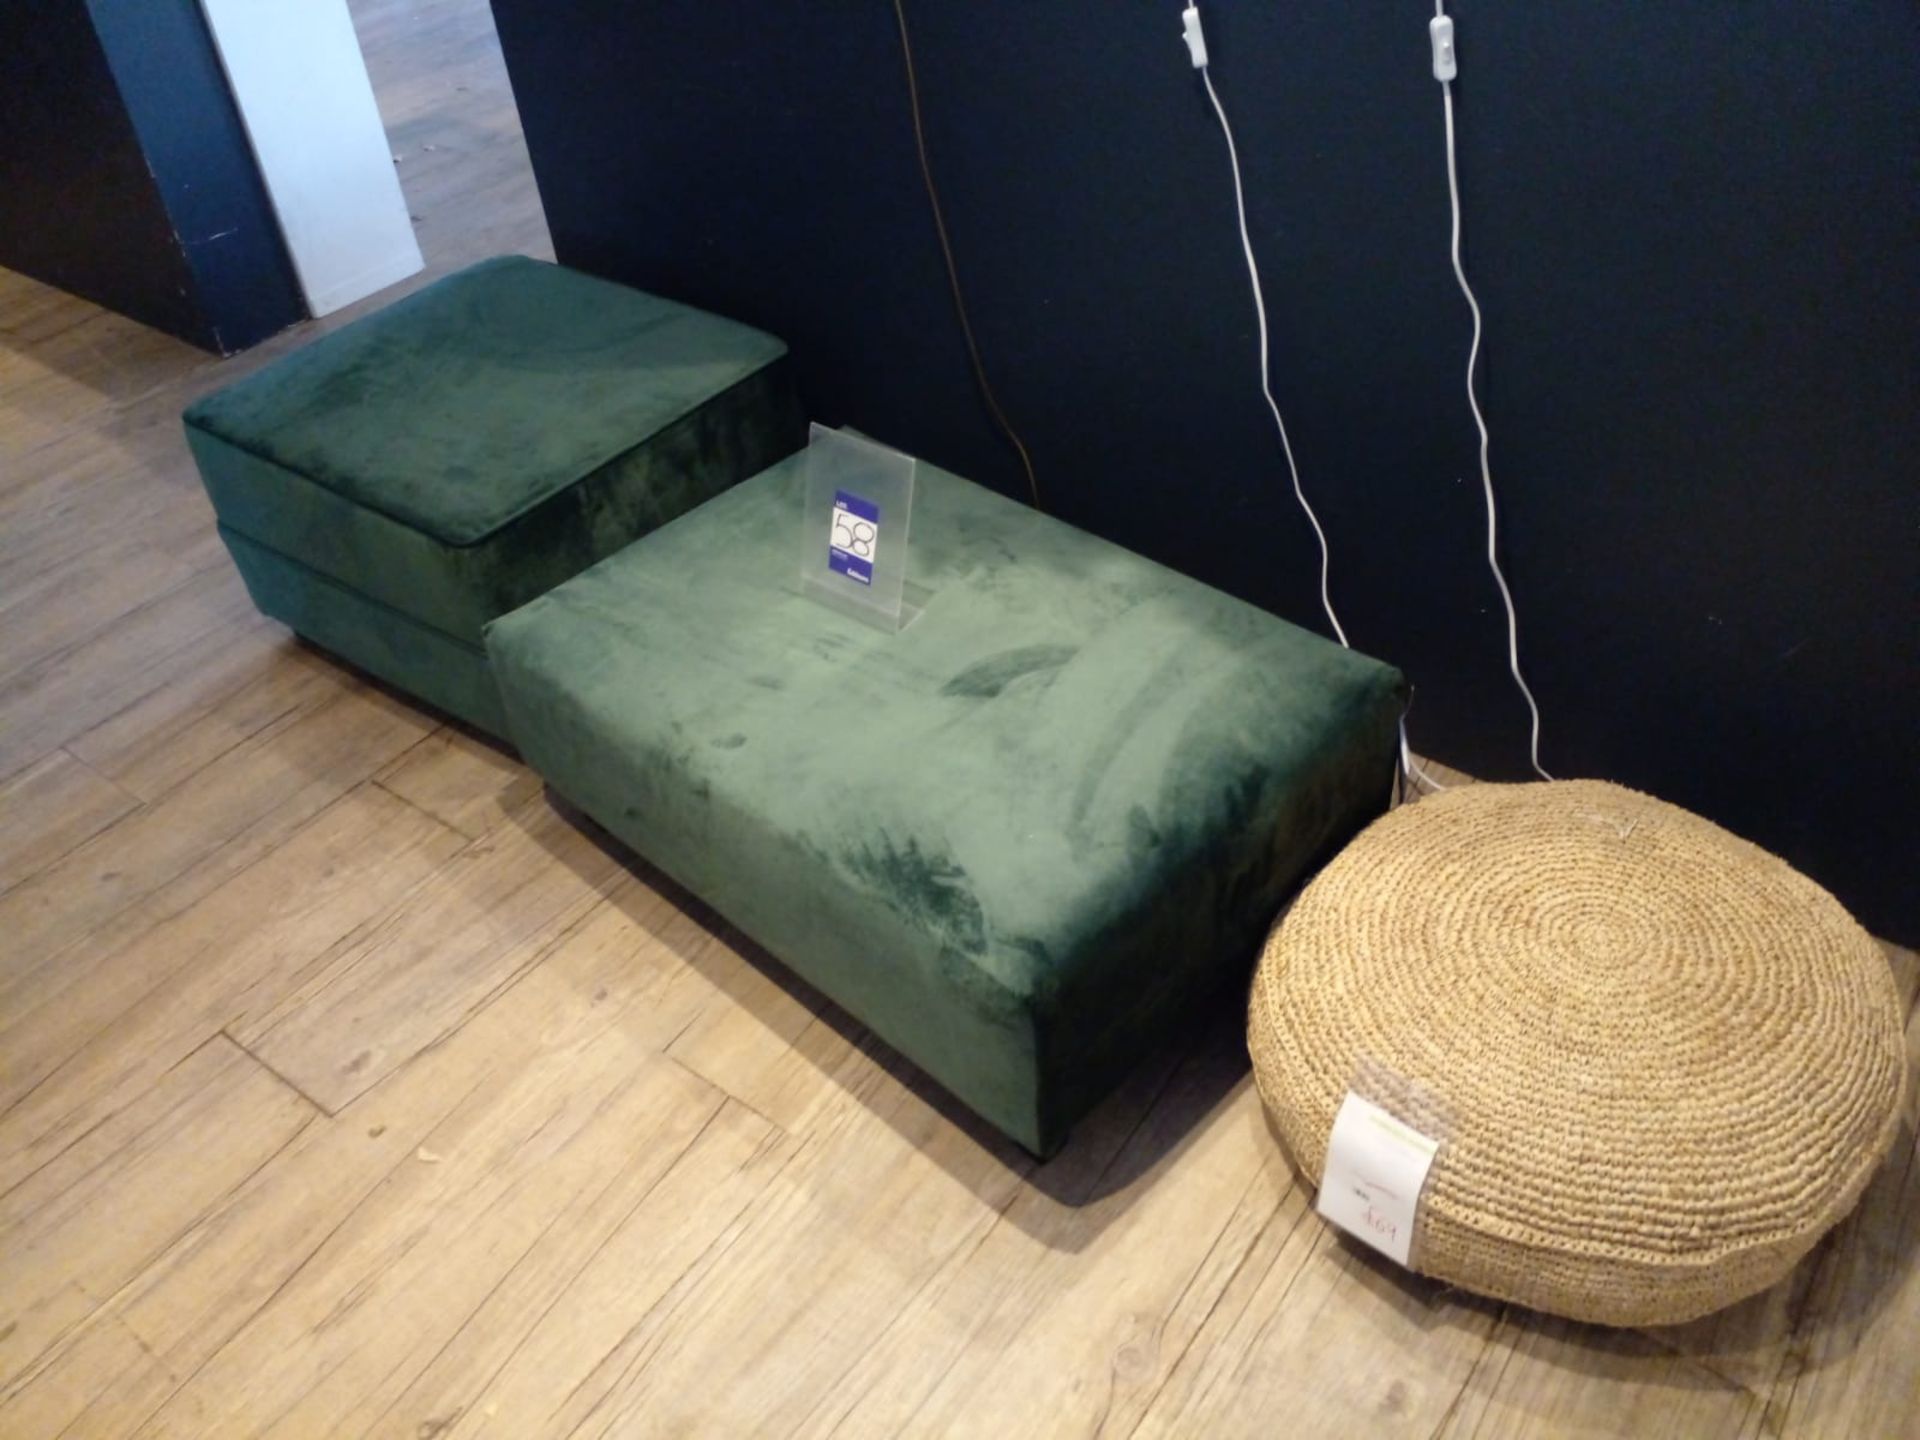 2 Green foot stools and a pouffe